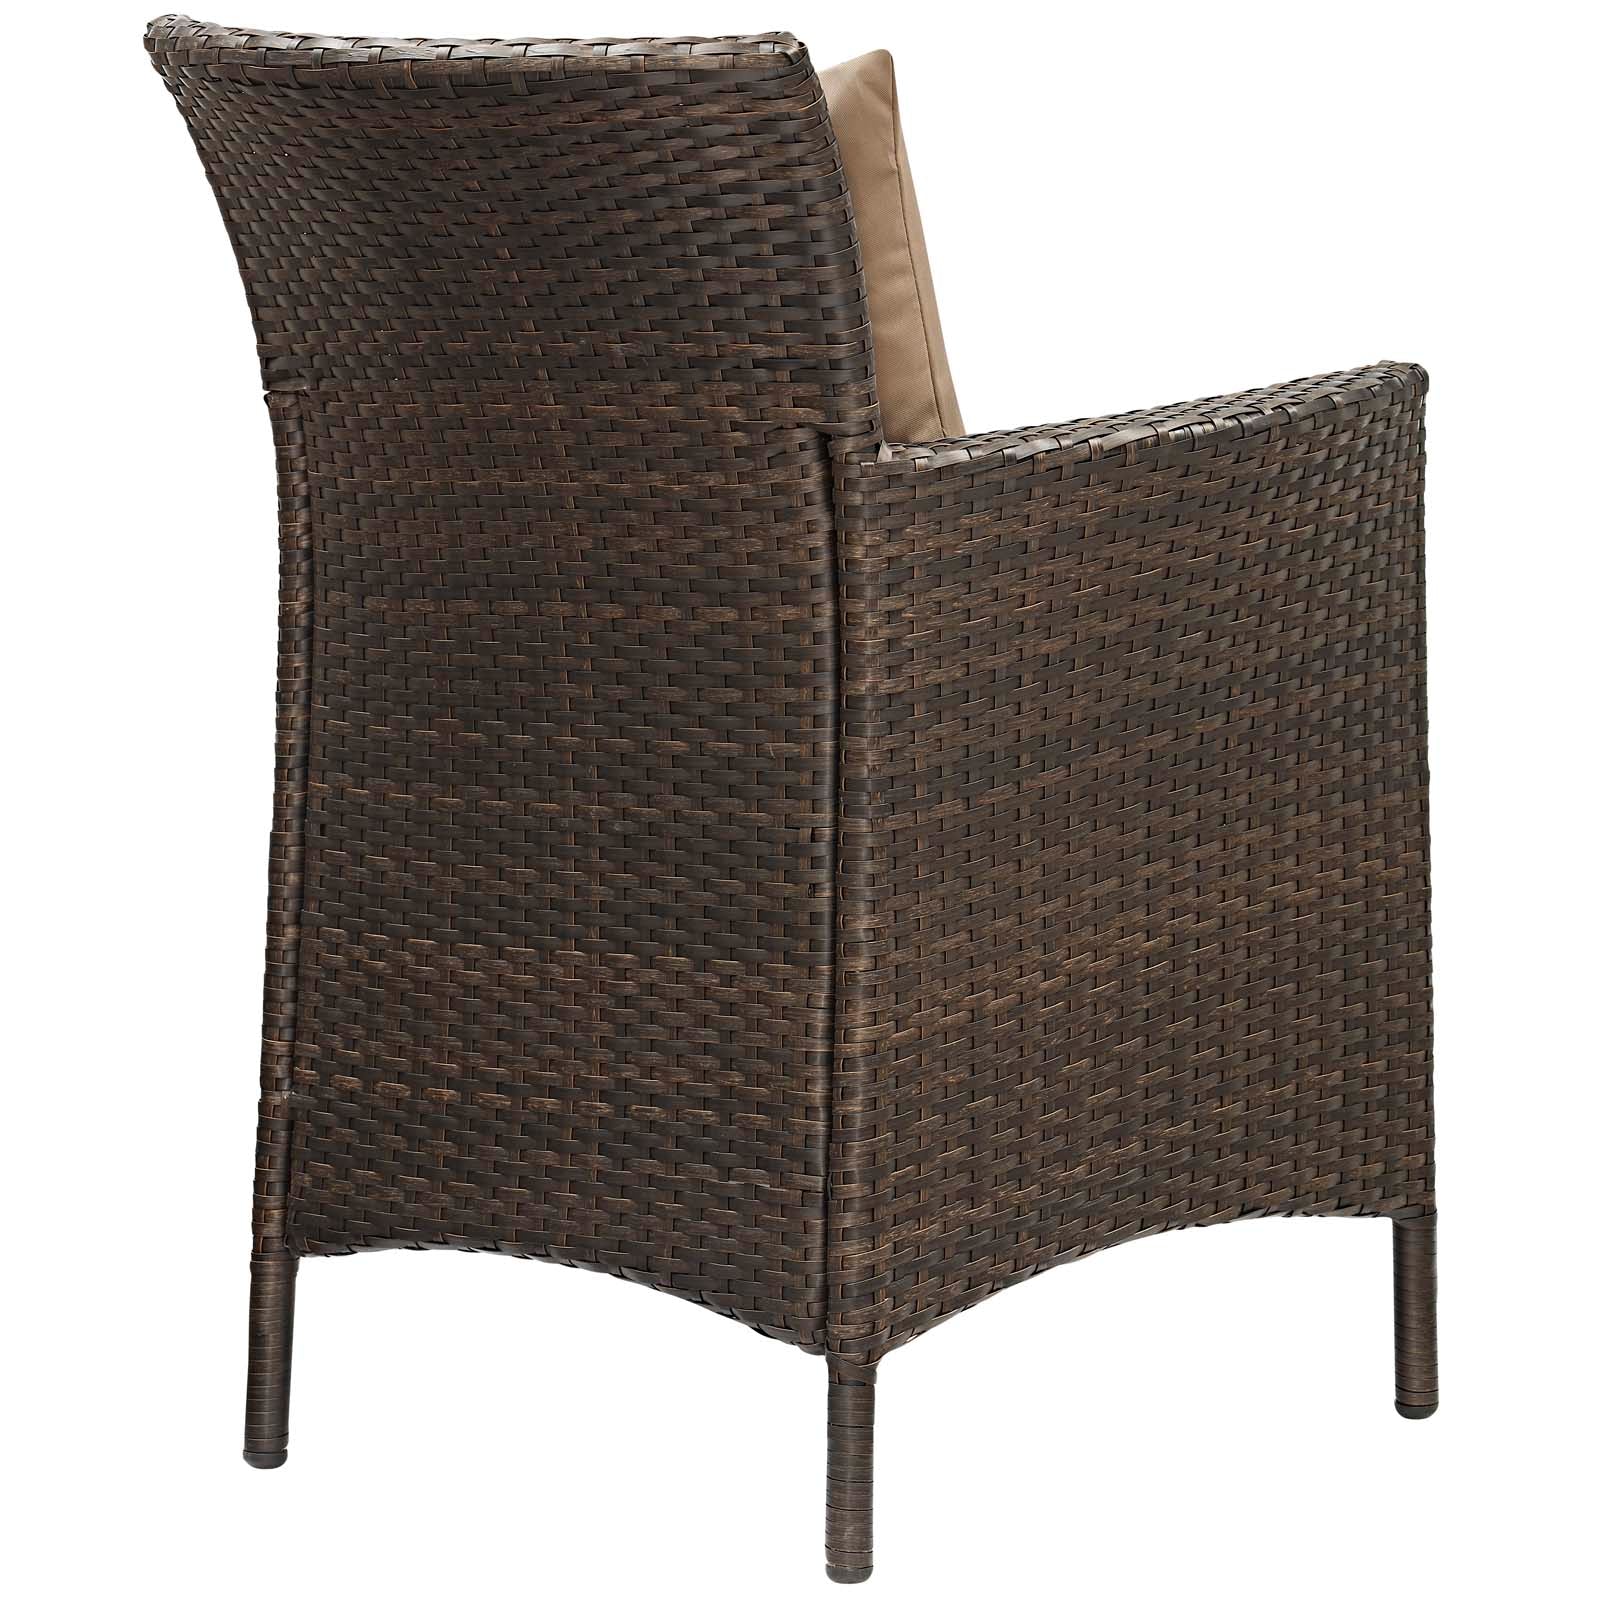 Modway Outdoor Dining Sets - Conduit 7 Piece Outdoor Patio Wicker Rattan Dining Set Brown Mocha